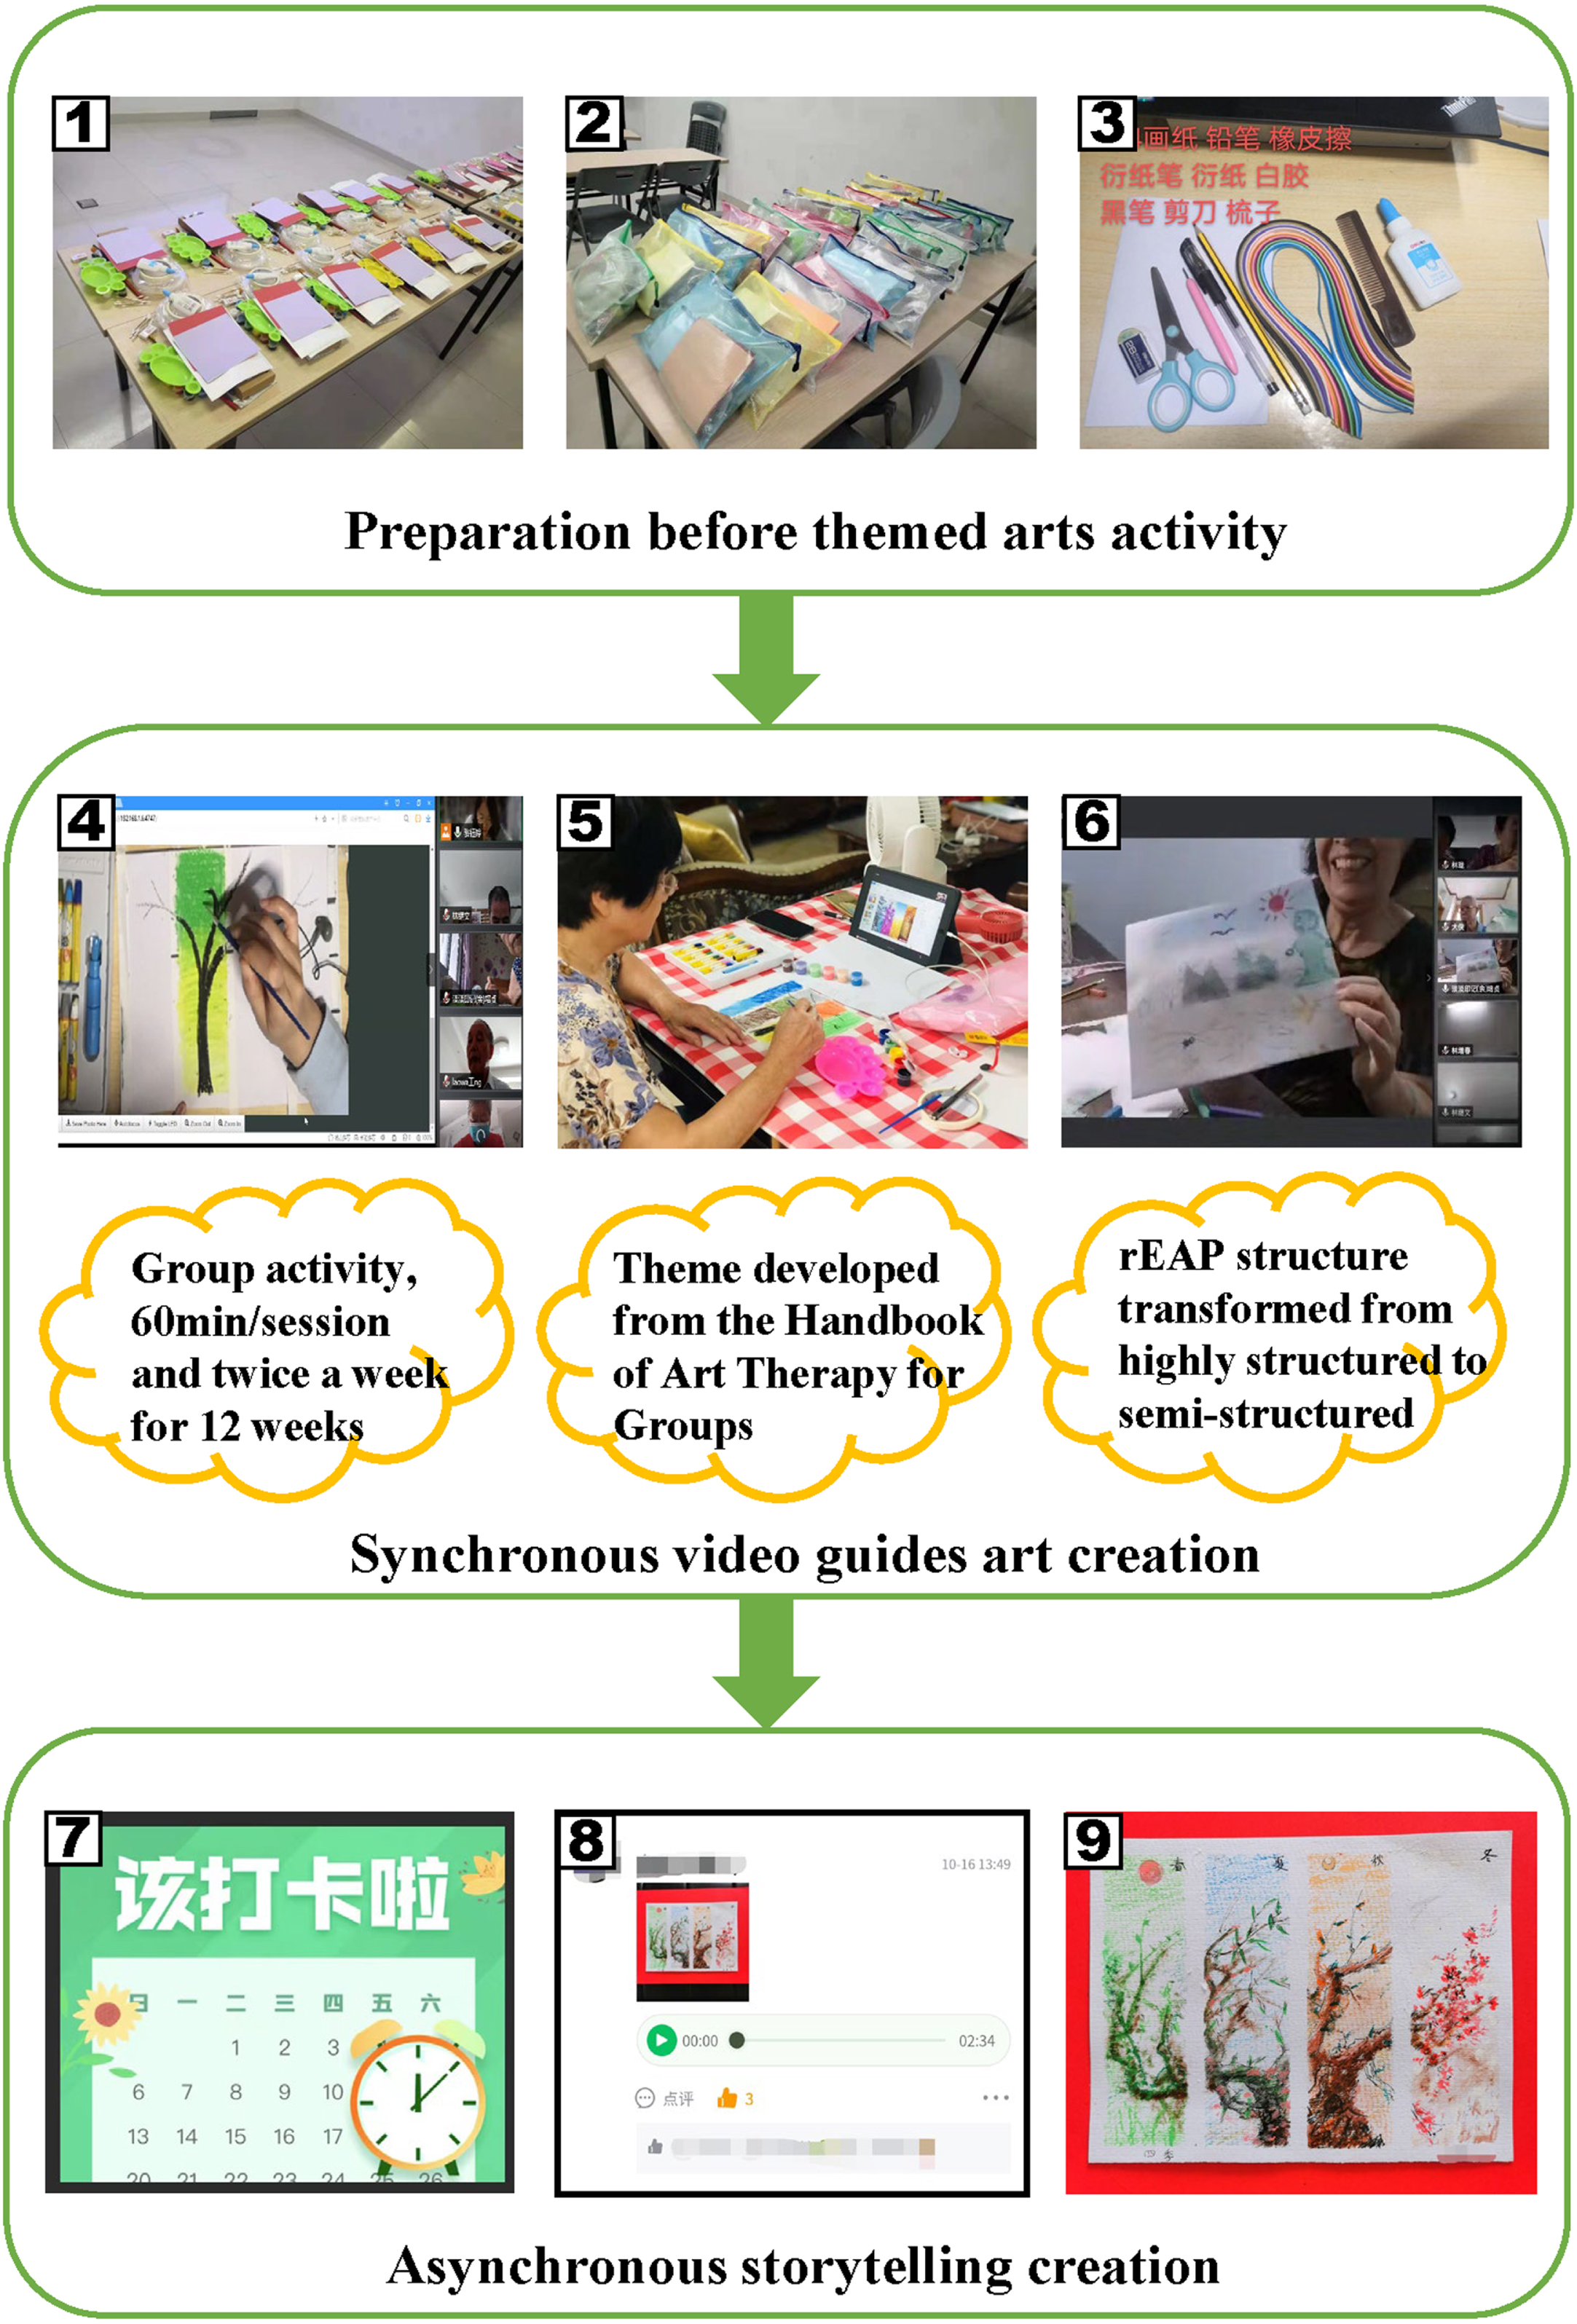 The rEAP procedure. (1)–(3) Art media kits; (4)–(6) Synchronous video guides art creation and interactional feedback; (7)–(9) Recorder of rEAP product.